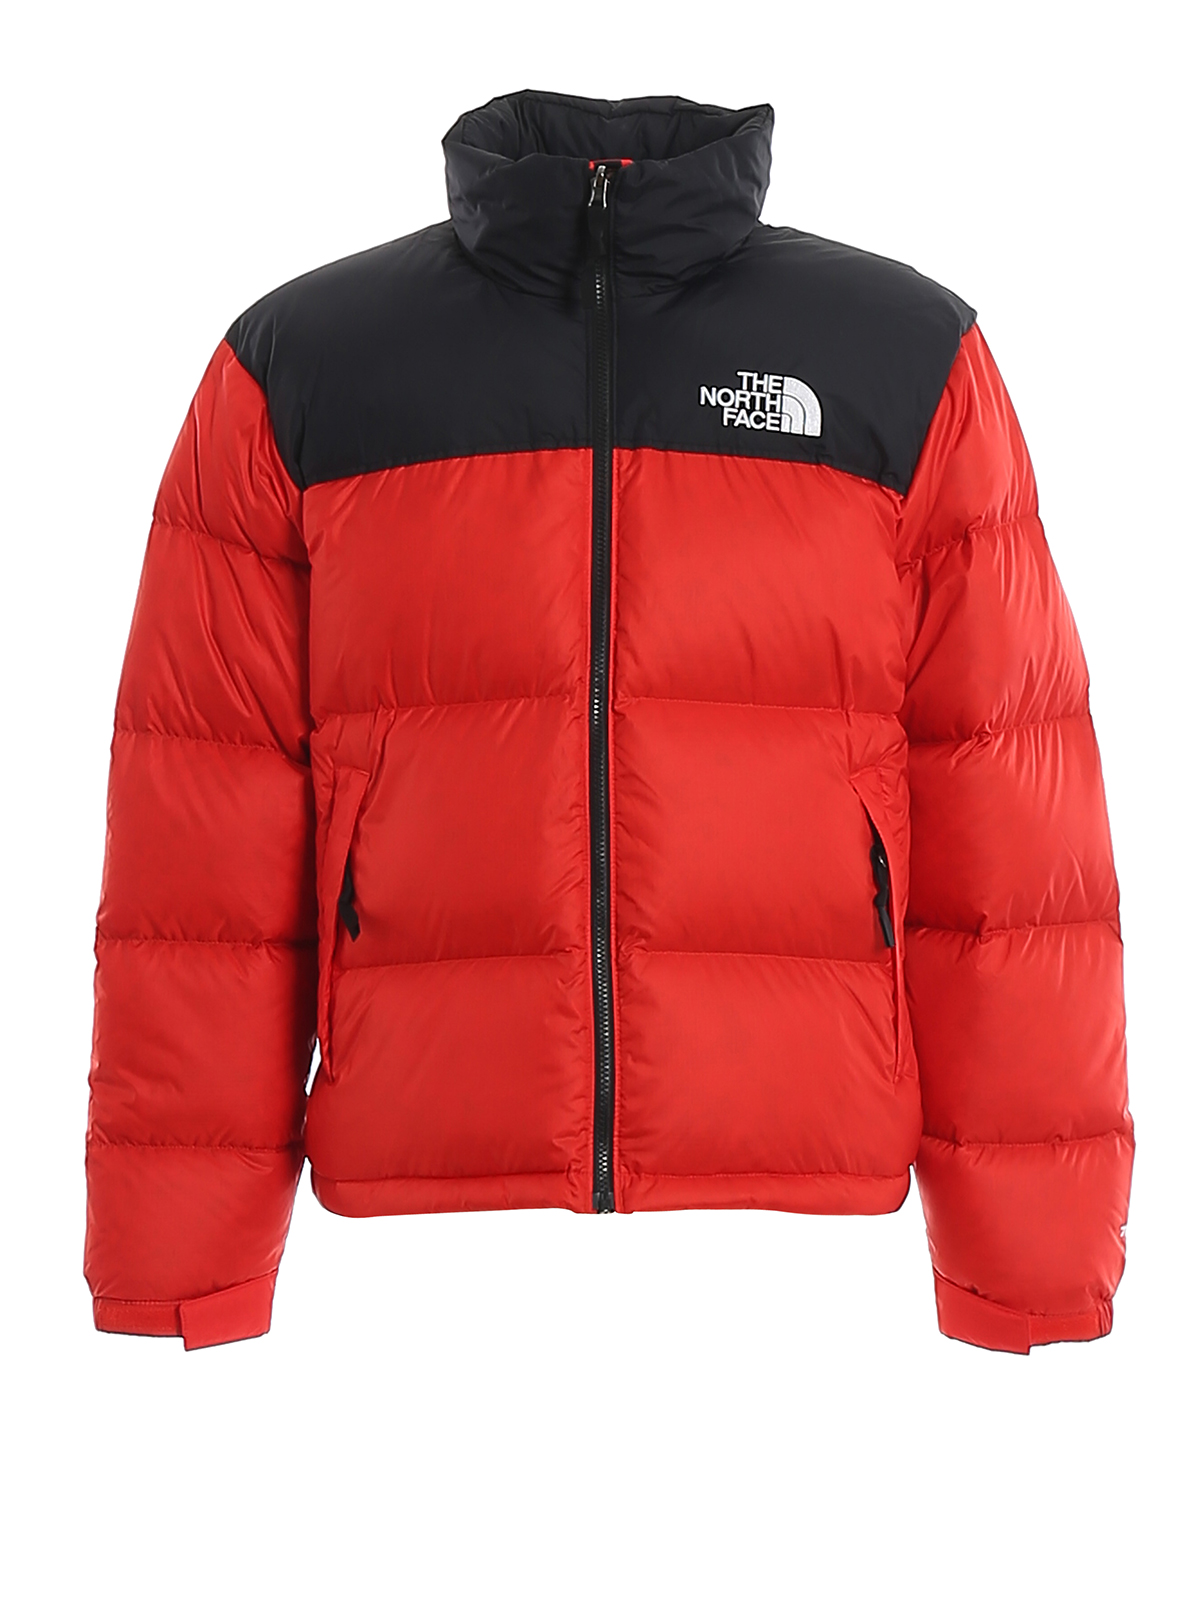 north face jacket two tone